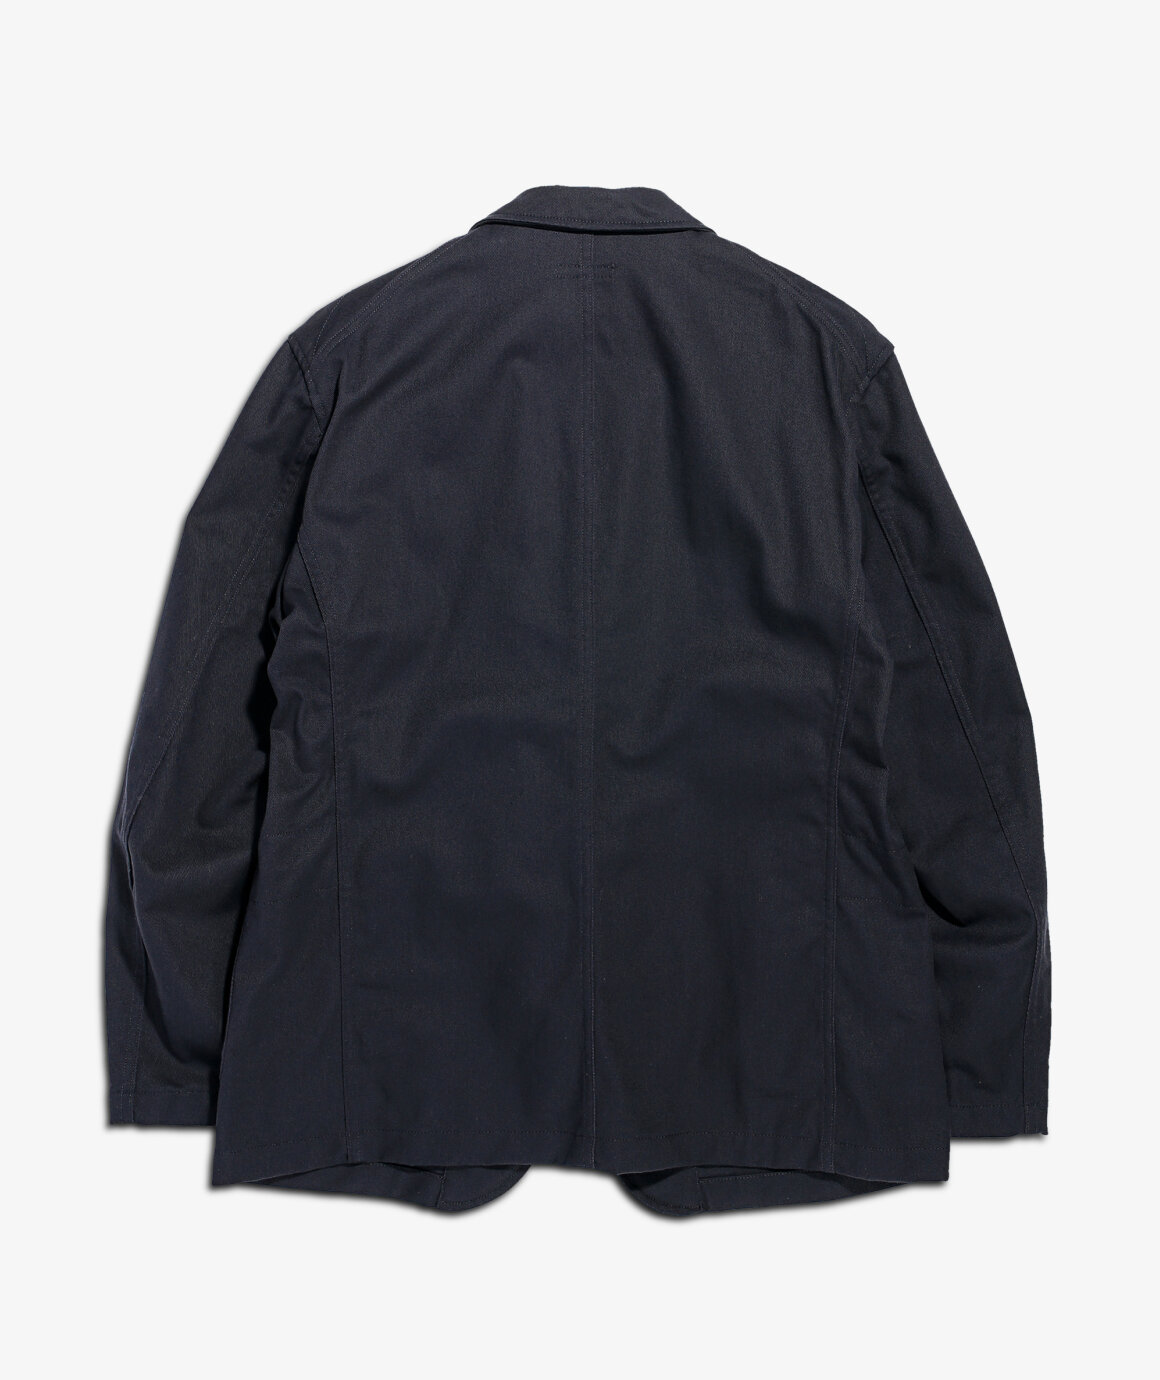 Norse Store | Shipping Worldwide - Engineered Garments Bedford Jacket ...